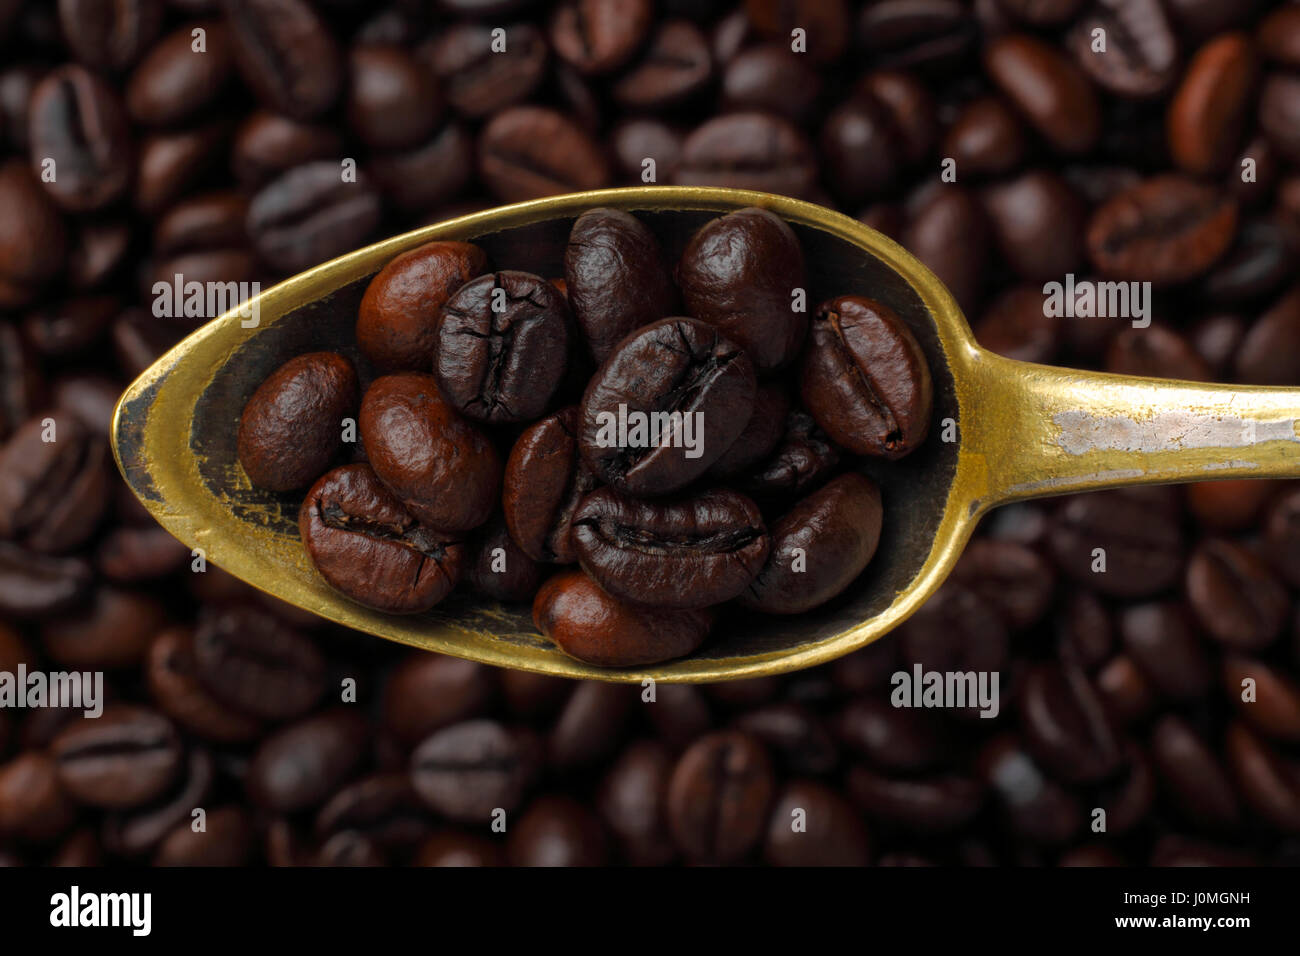 Aged spoon filled with coffee grains (Robusta coffee). Close-up, top view. Stock Photo